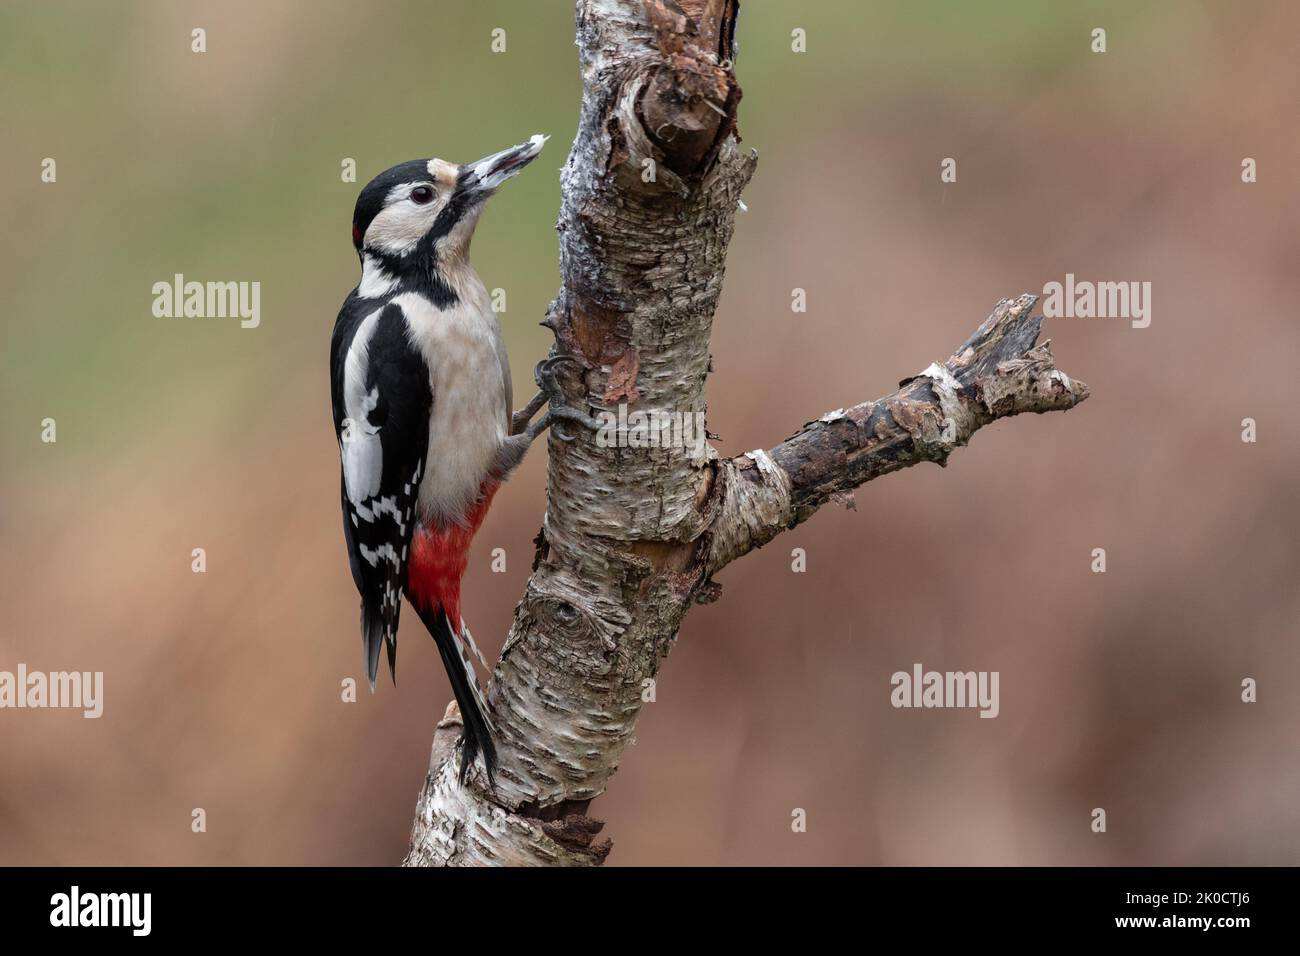 A profile portrait of a male great spotted woodpecker, Dendrocopos major, perched on a silver birch tree Stock Photo